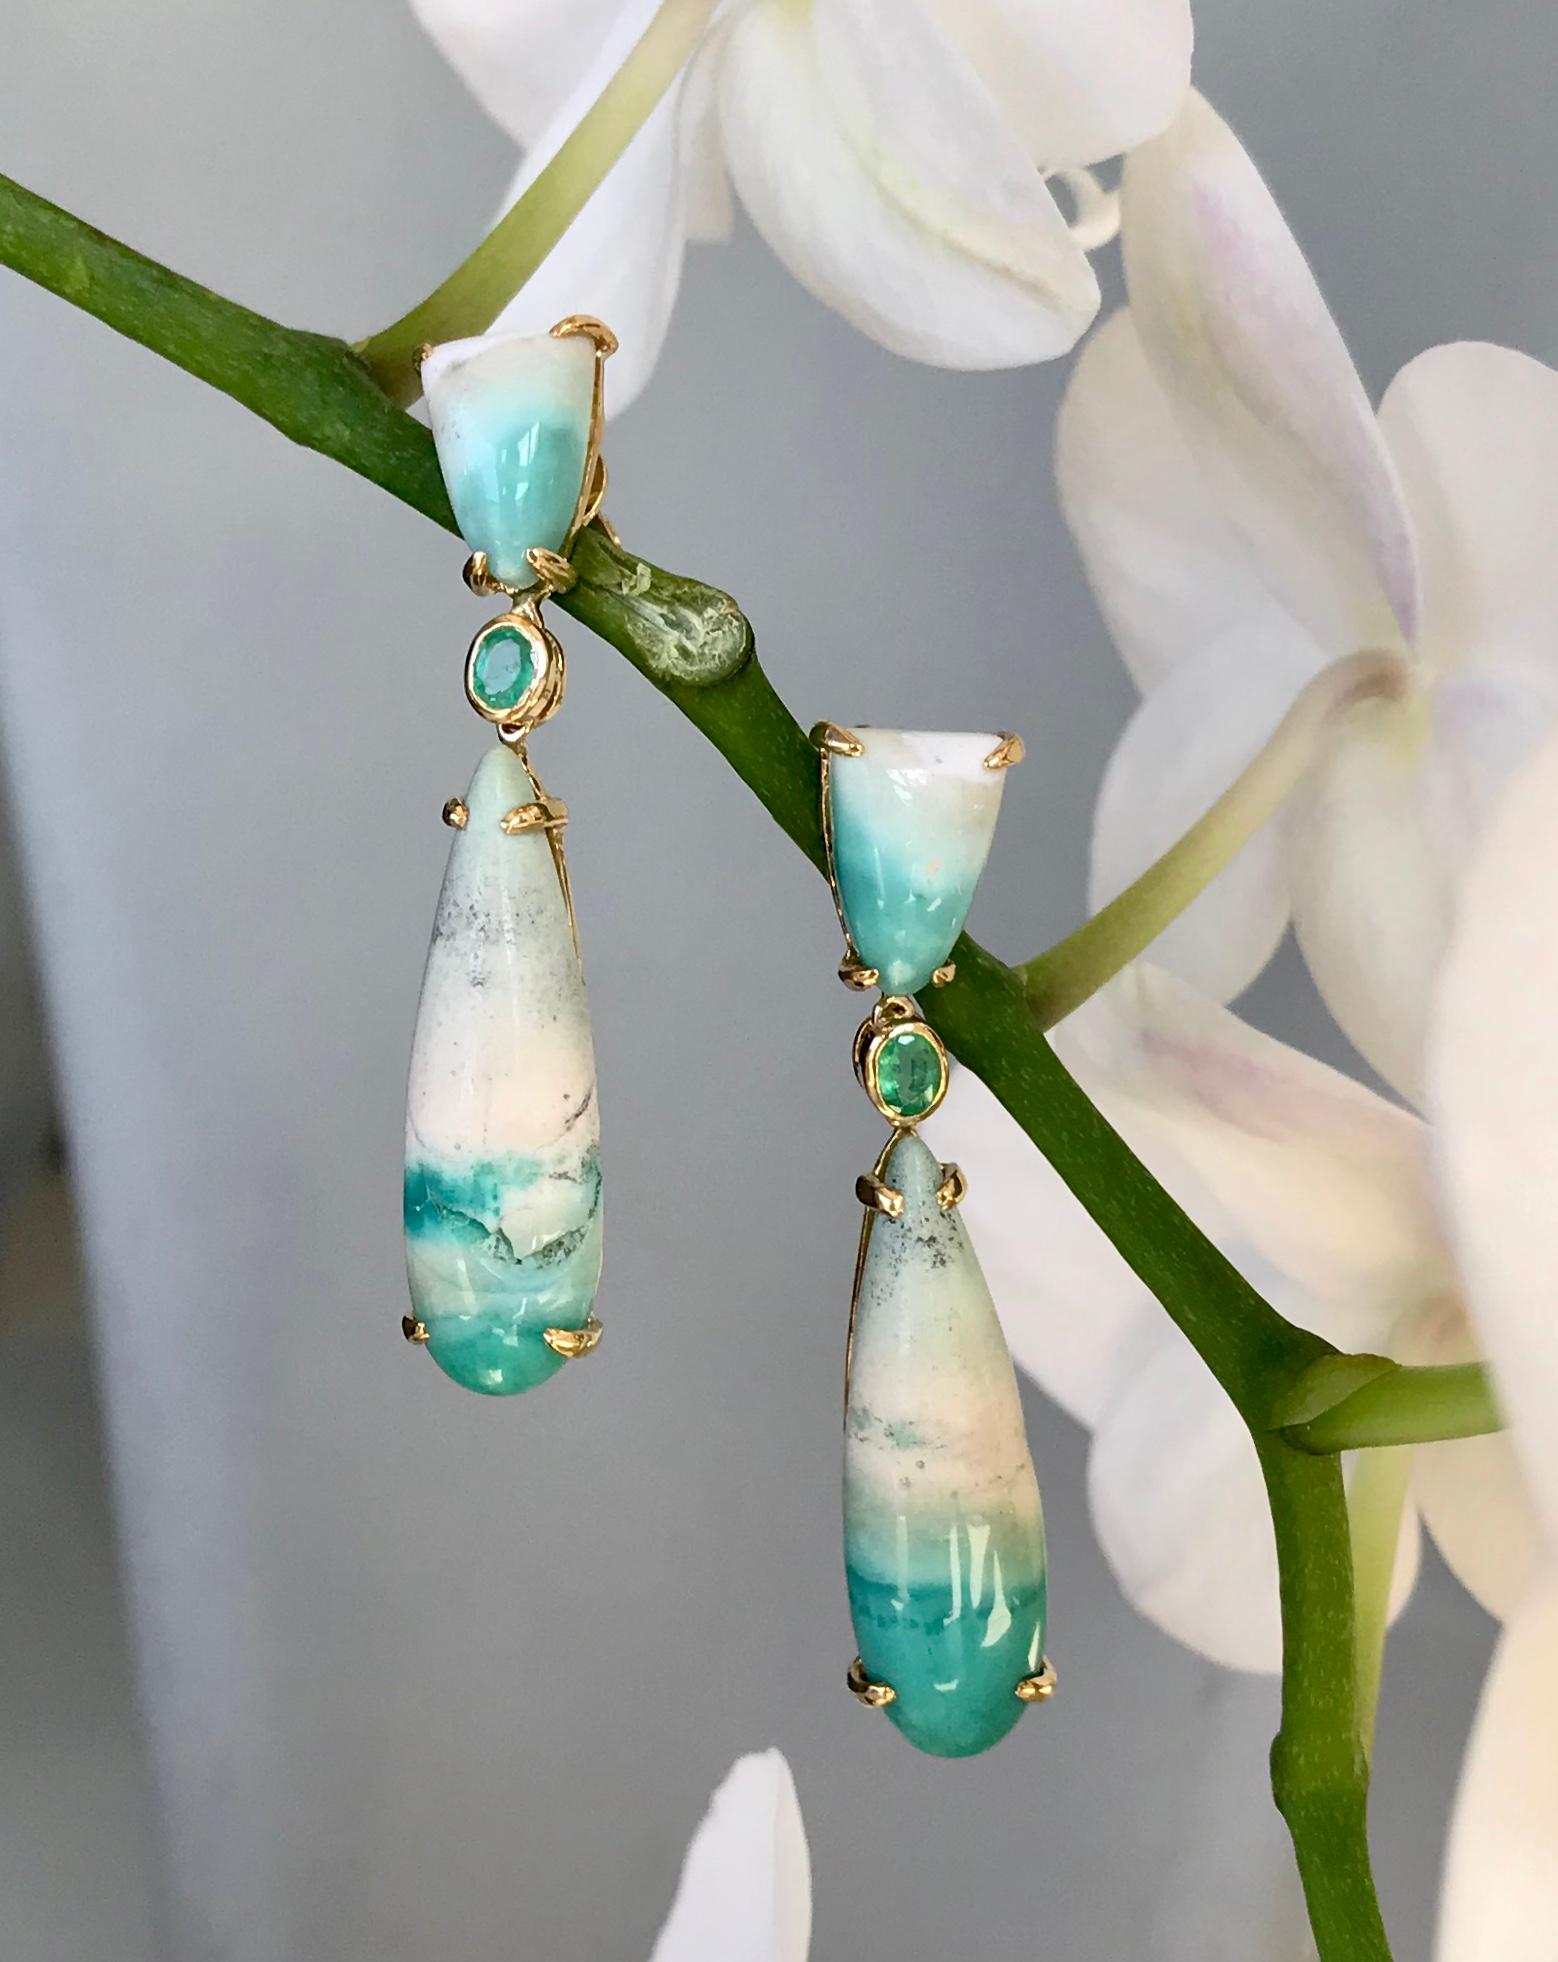 These Joon Han one-of-a-kind emerald and opalized petrified wood drop dangle earrings are a refreshing color palette for the summer. The natural scenes etched on the opalized wood evoke sandy beaches and crashing blue green ocean waves. Light and